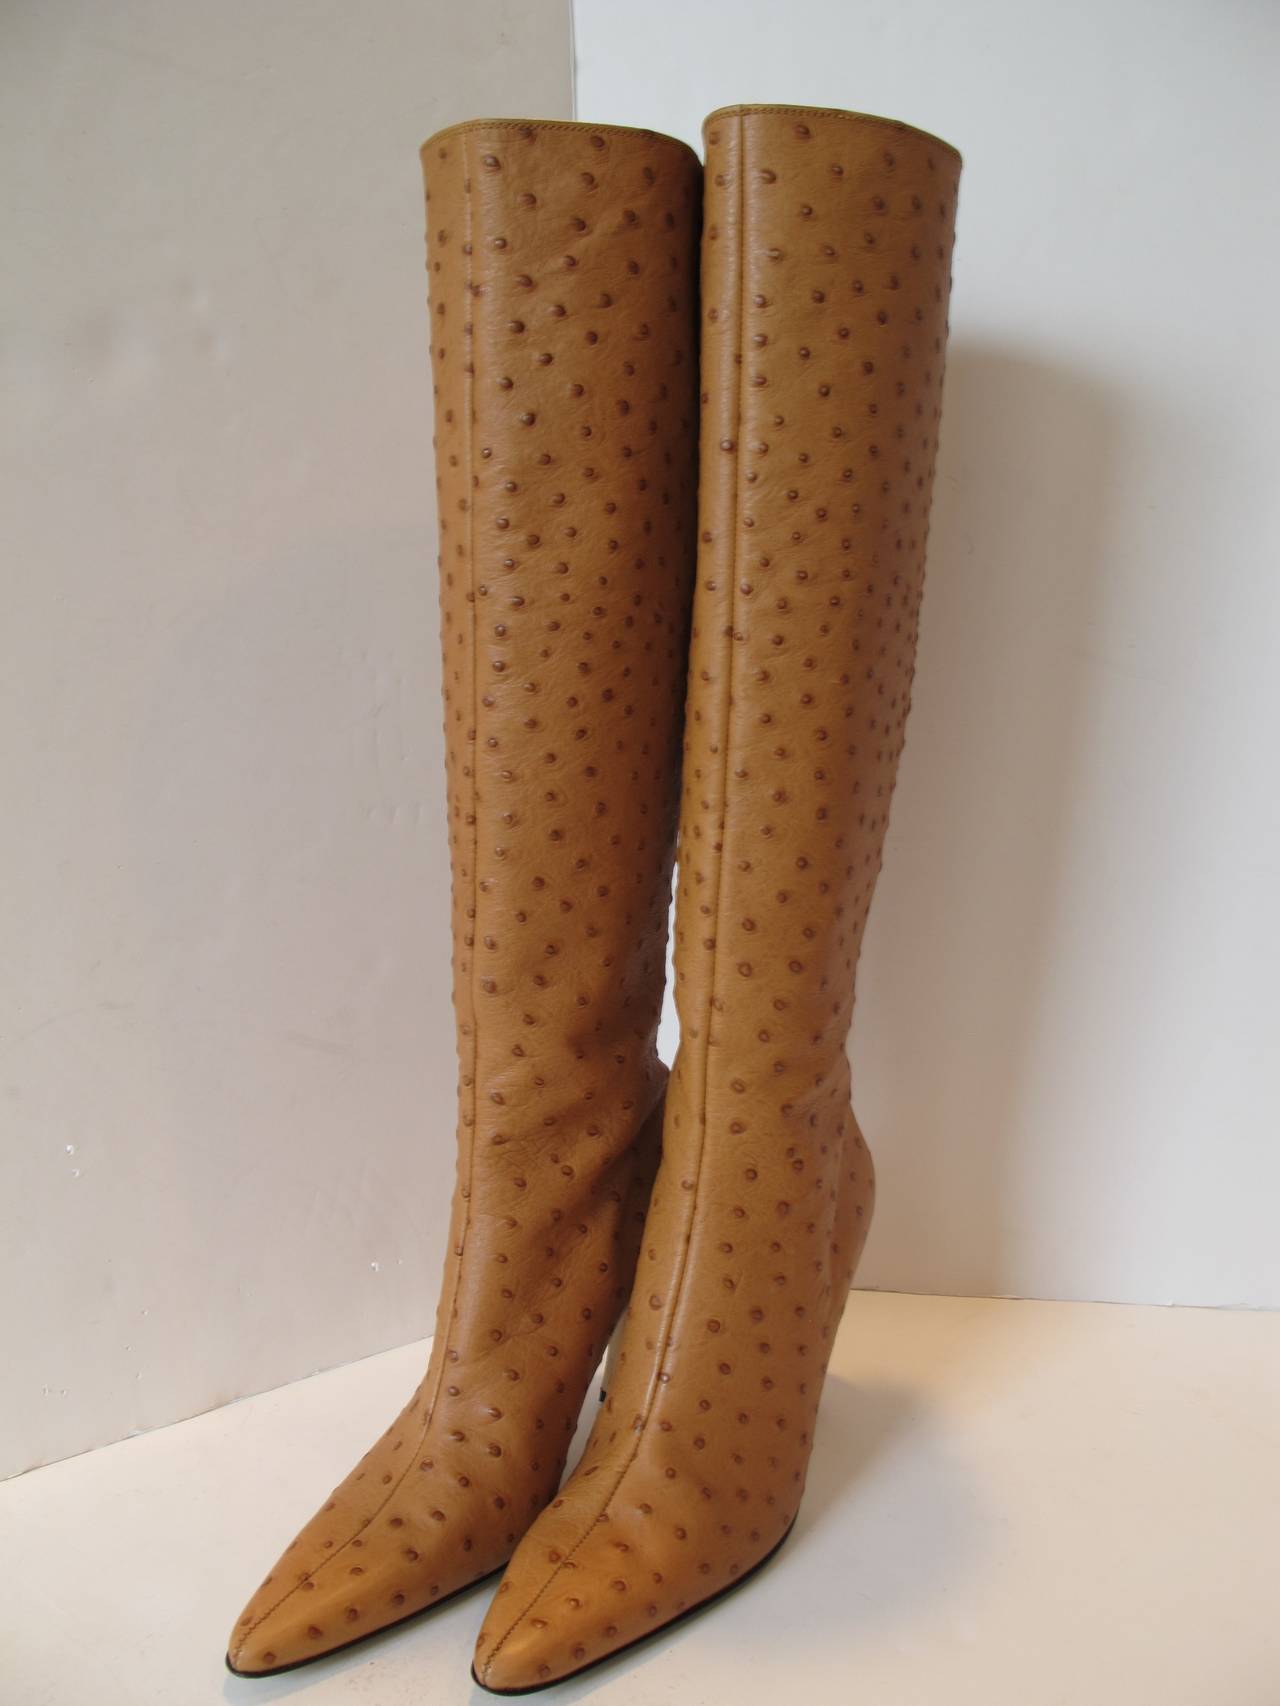 New Walter Steiger Camel-Ostrich knee high boots with 15.75 inch zipper from top of heel to top of boot. Understated chic! Heel measures 3.5 inches.